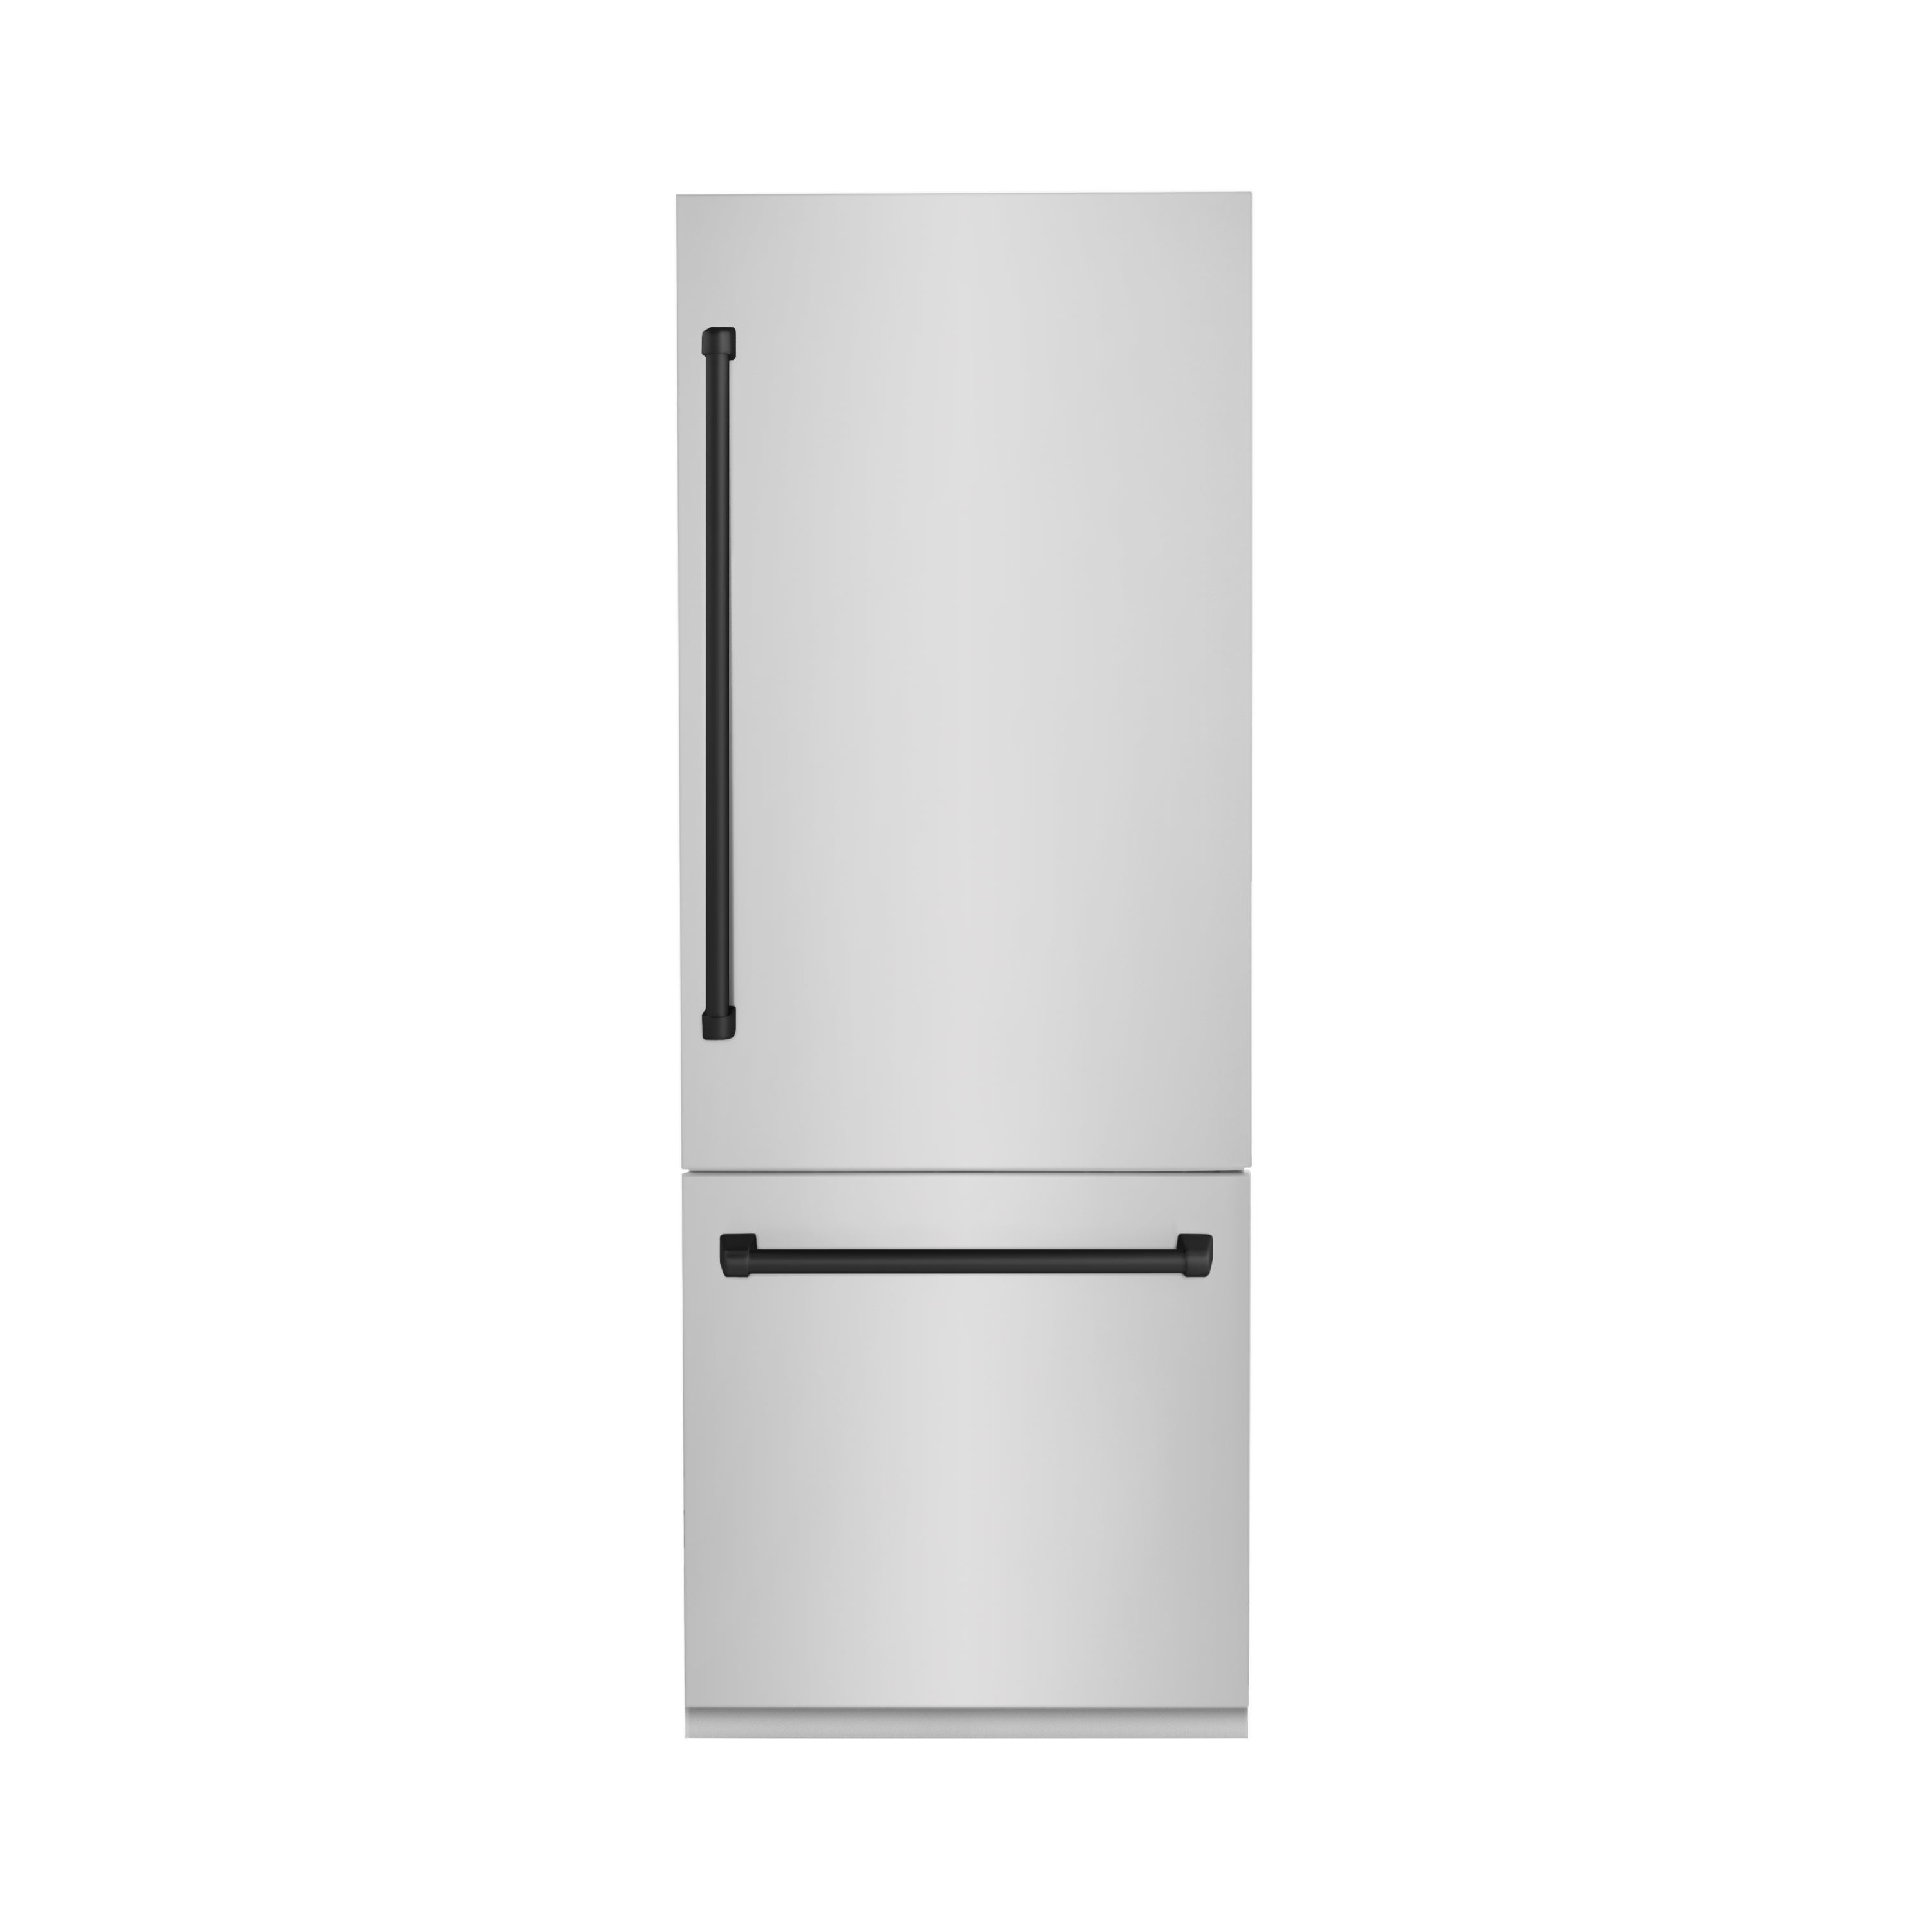 ZLINE Autograph Edition 30 in. Built-In Refrigerator with Stainless Steel Panels and Matte Black Accents, front, door closed.